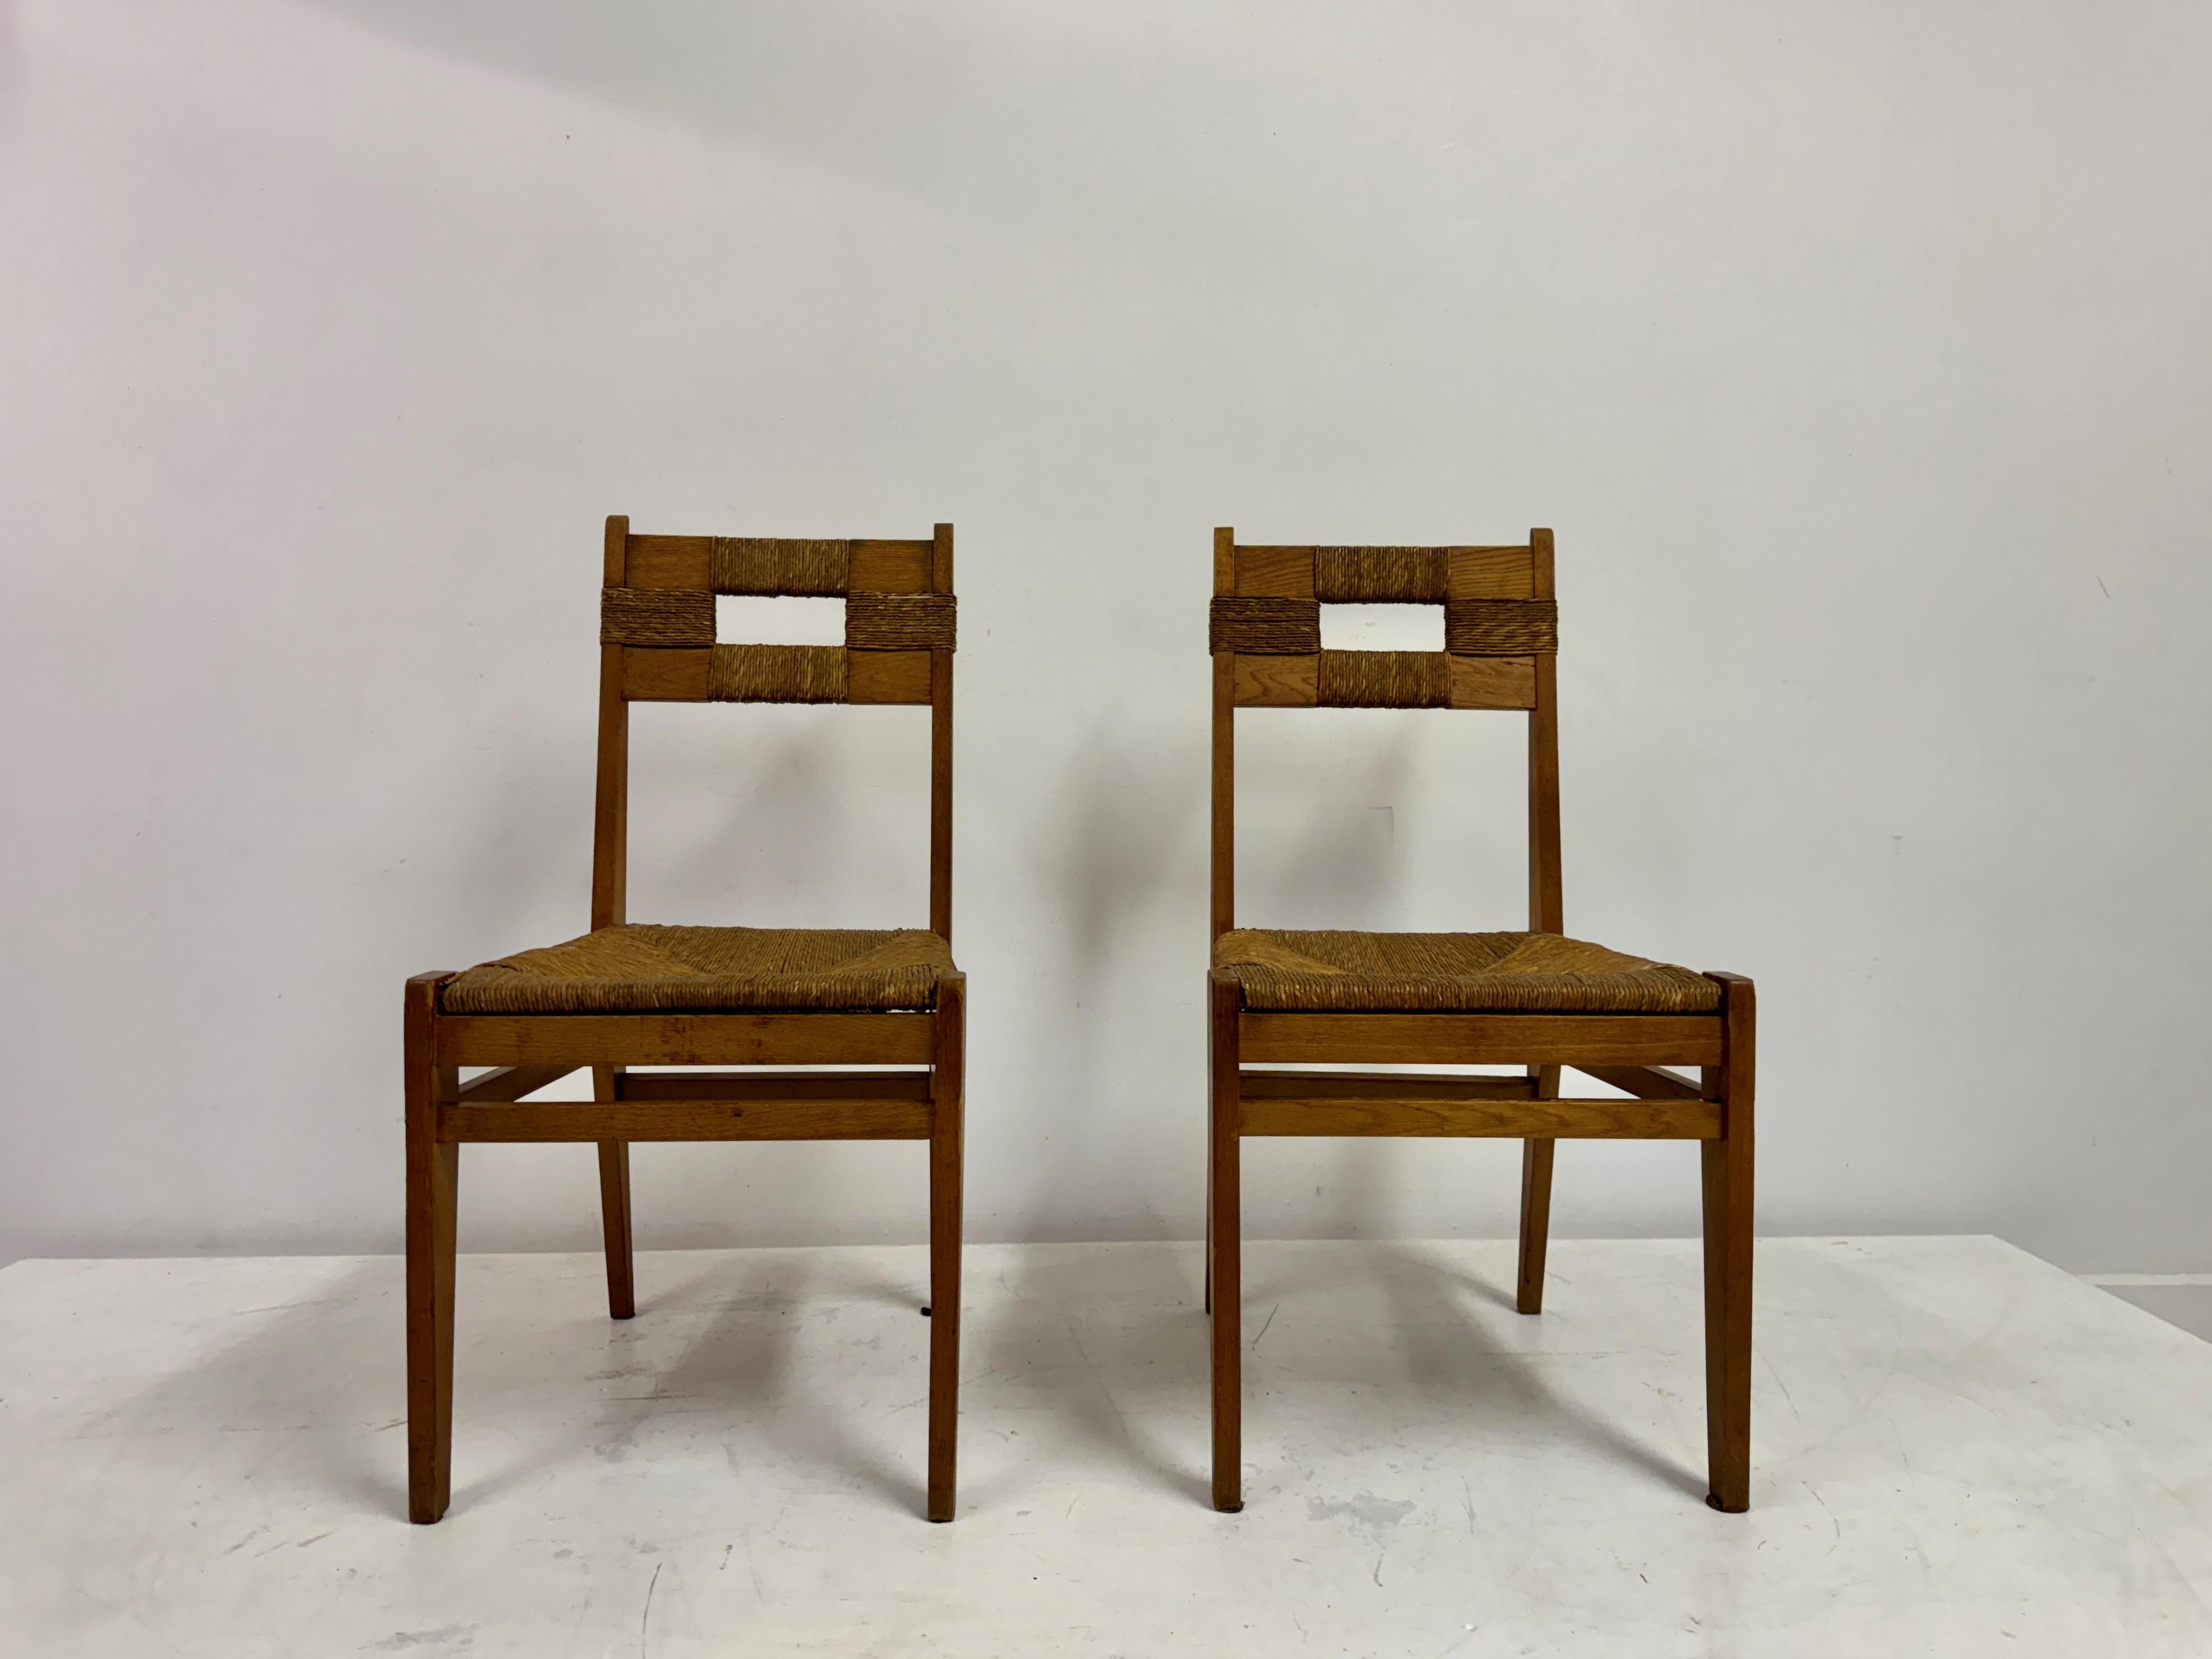 Pair of side chairs

Oak frame

Rush seat

Seat height 44cm

1950s/1960s Netherlands